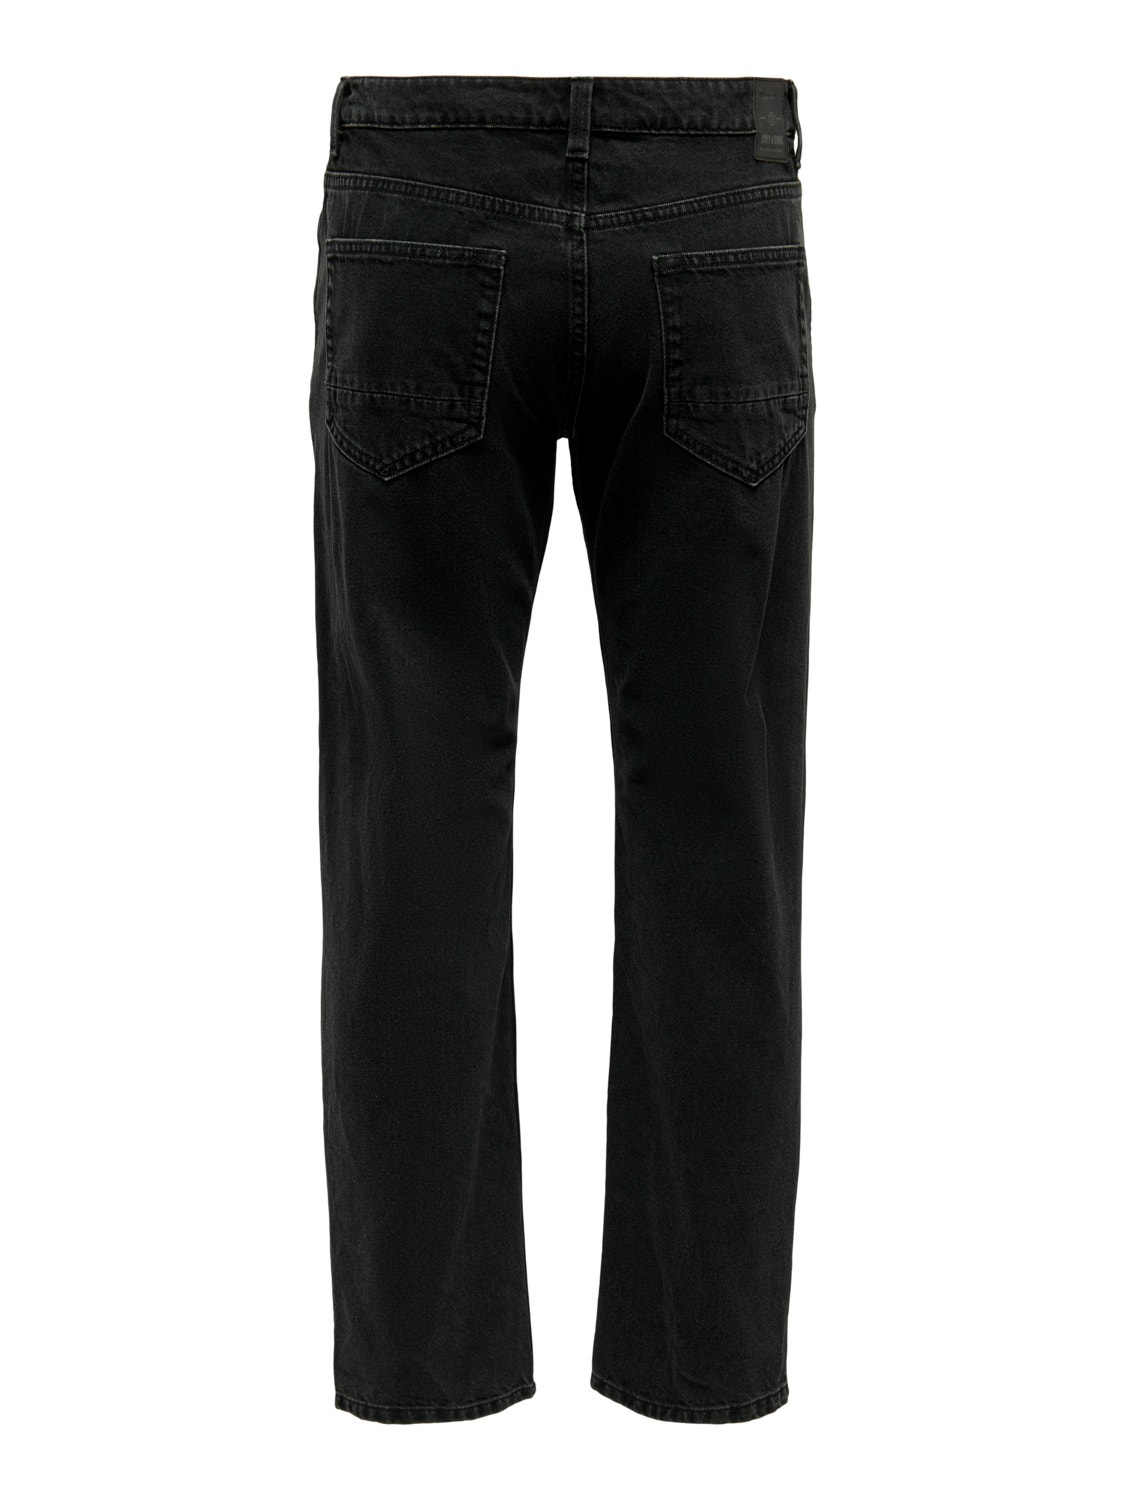 ONLY & SONS Jeans Straight Fit Taille classique -Black Denim - 22022961